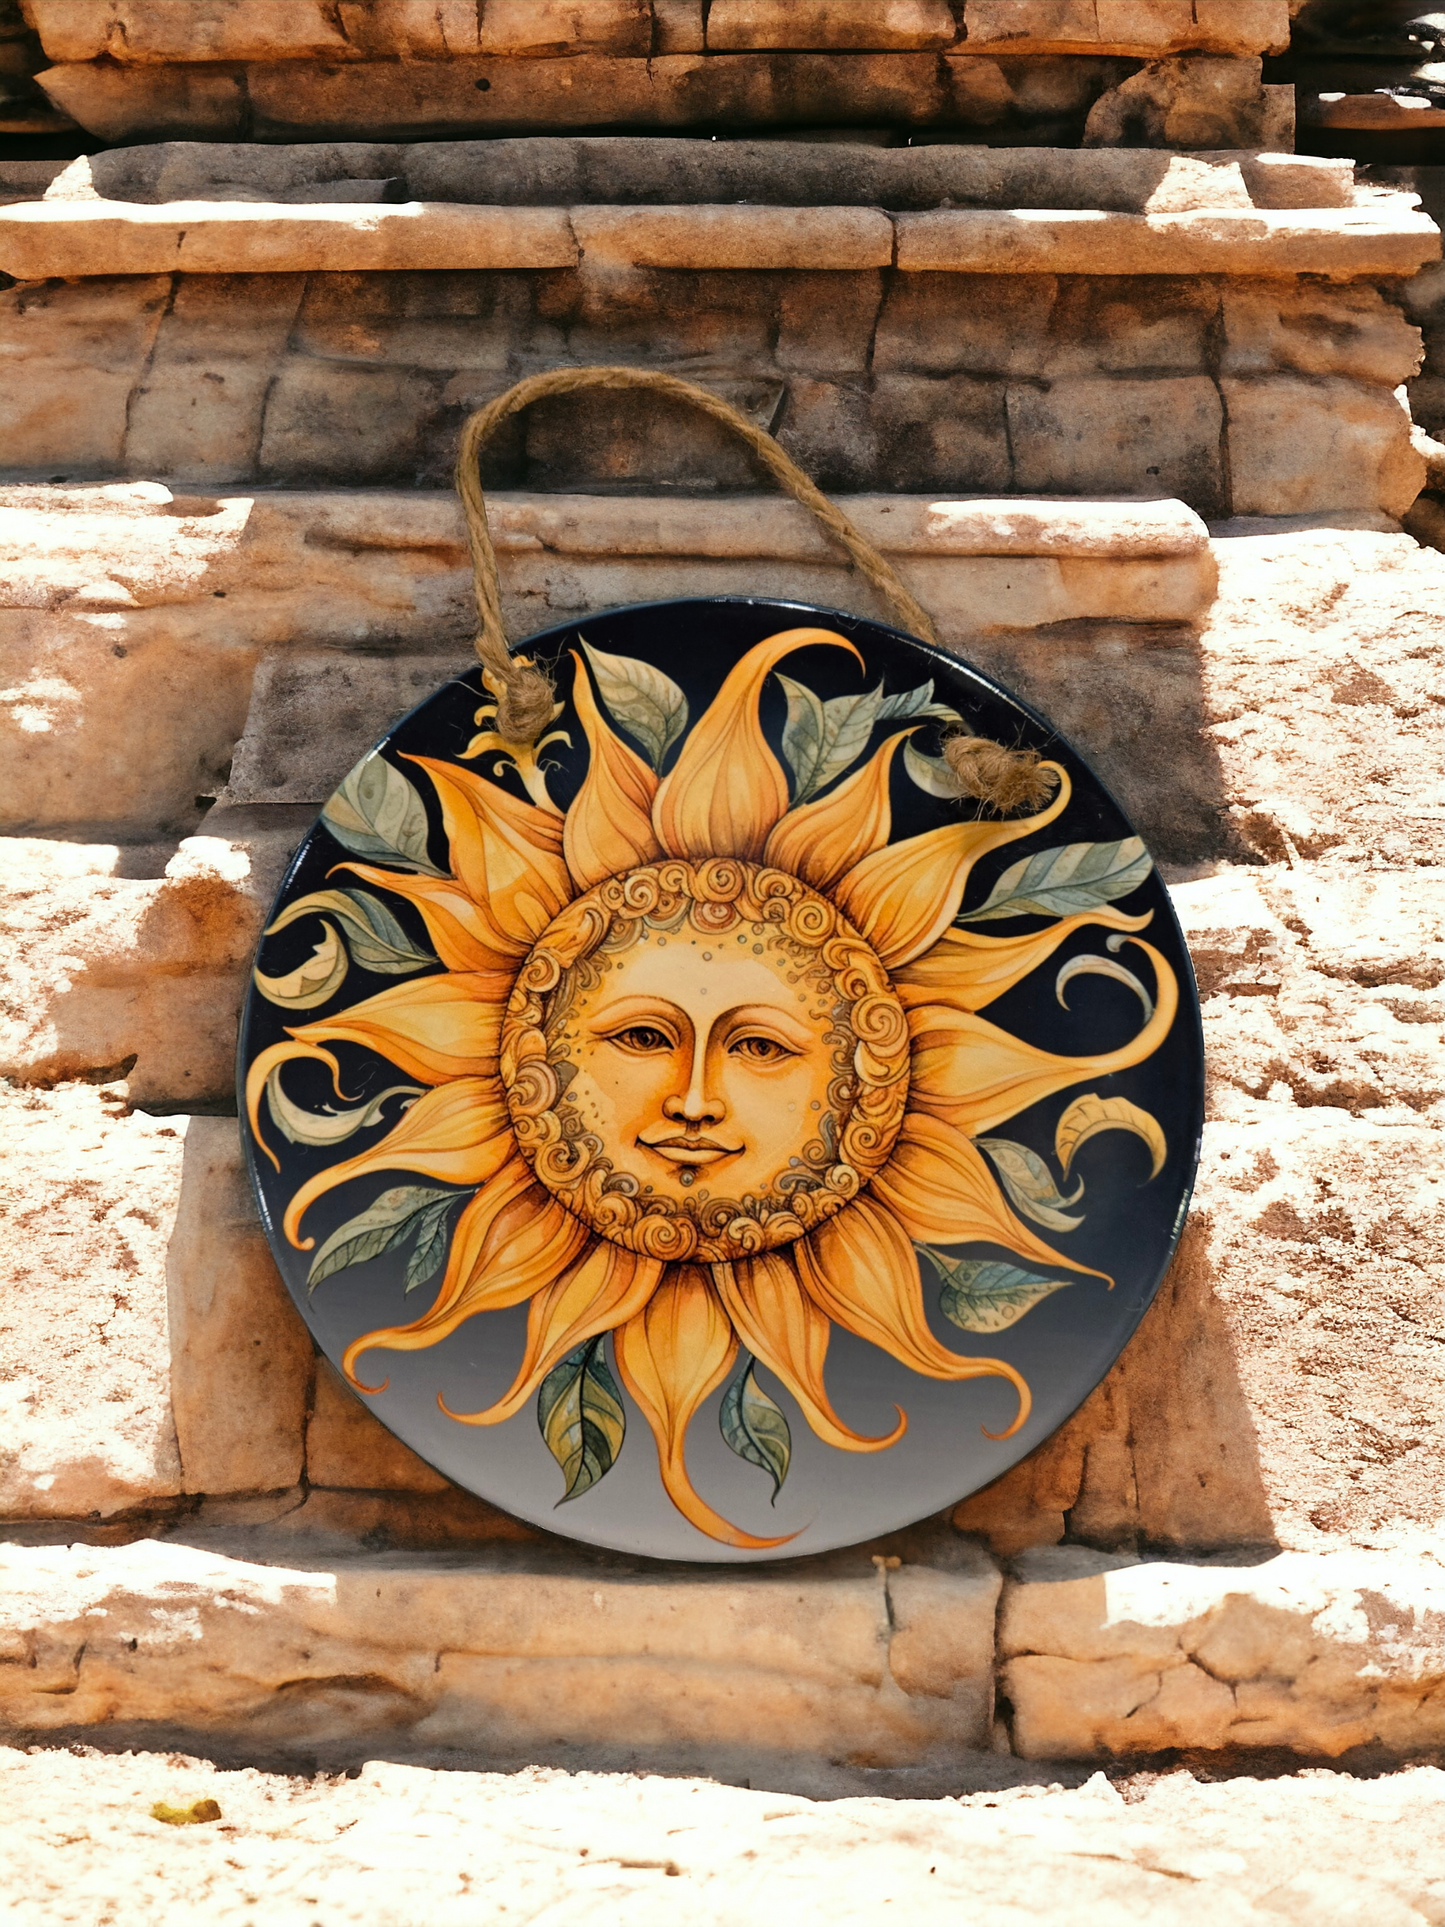 7" round ceramic sunflower face wall plaque (litha1#15)